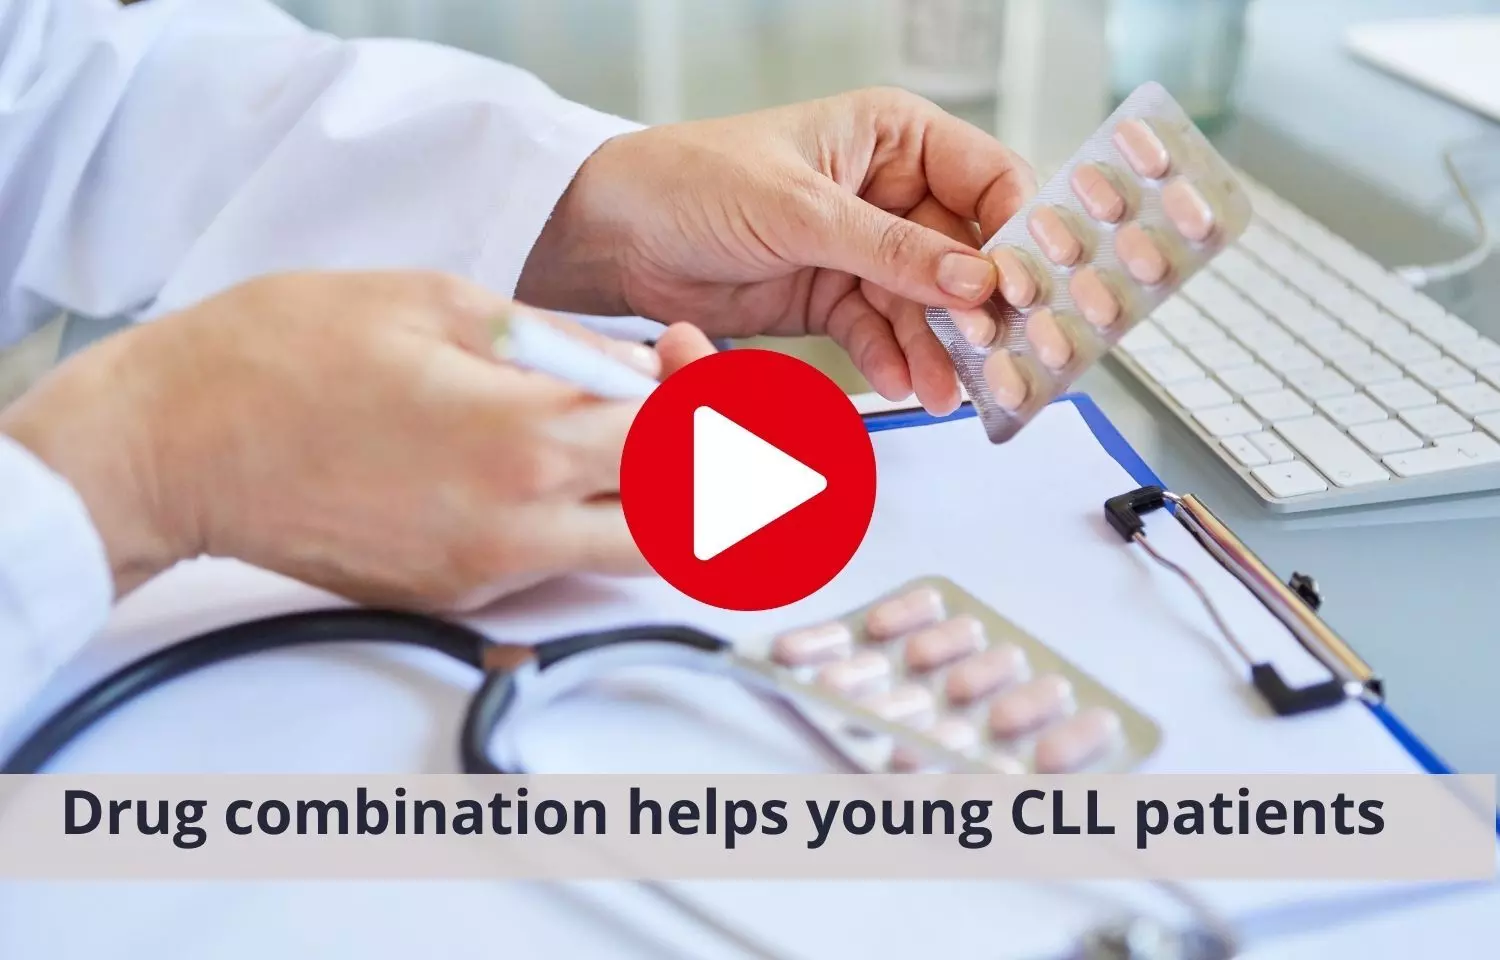 Ibrutinib, chemoimmunotherapy combination helps young CLL patients